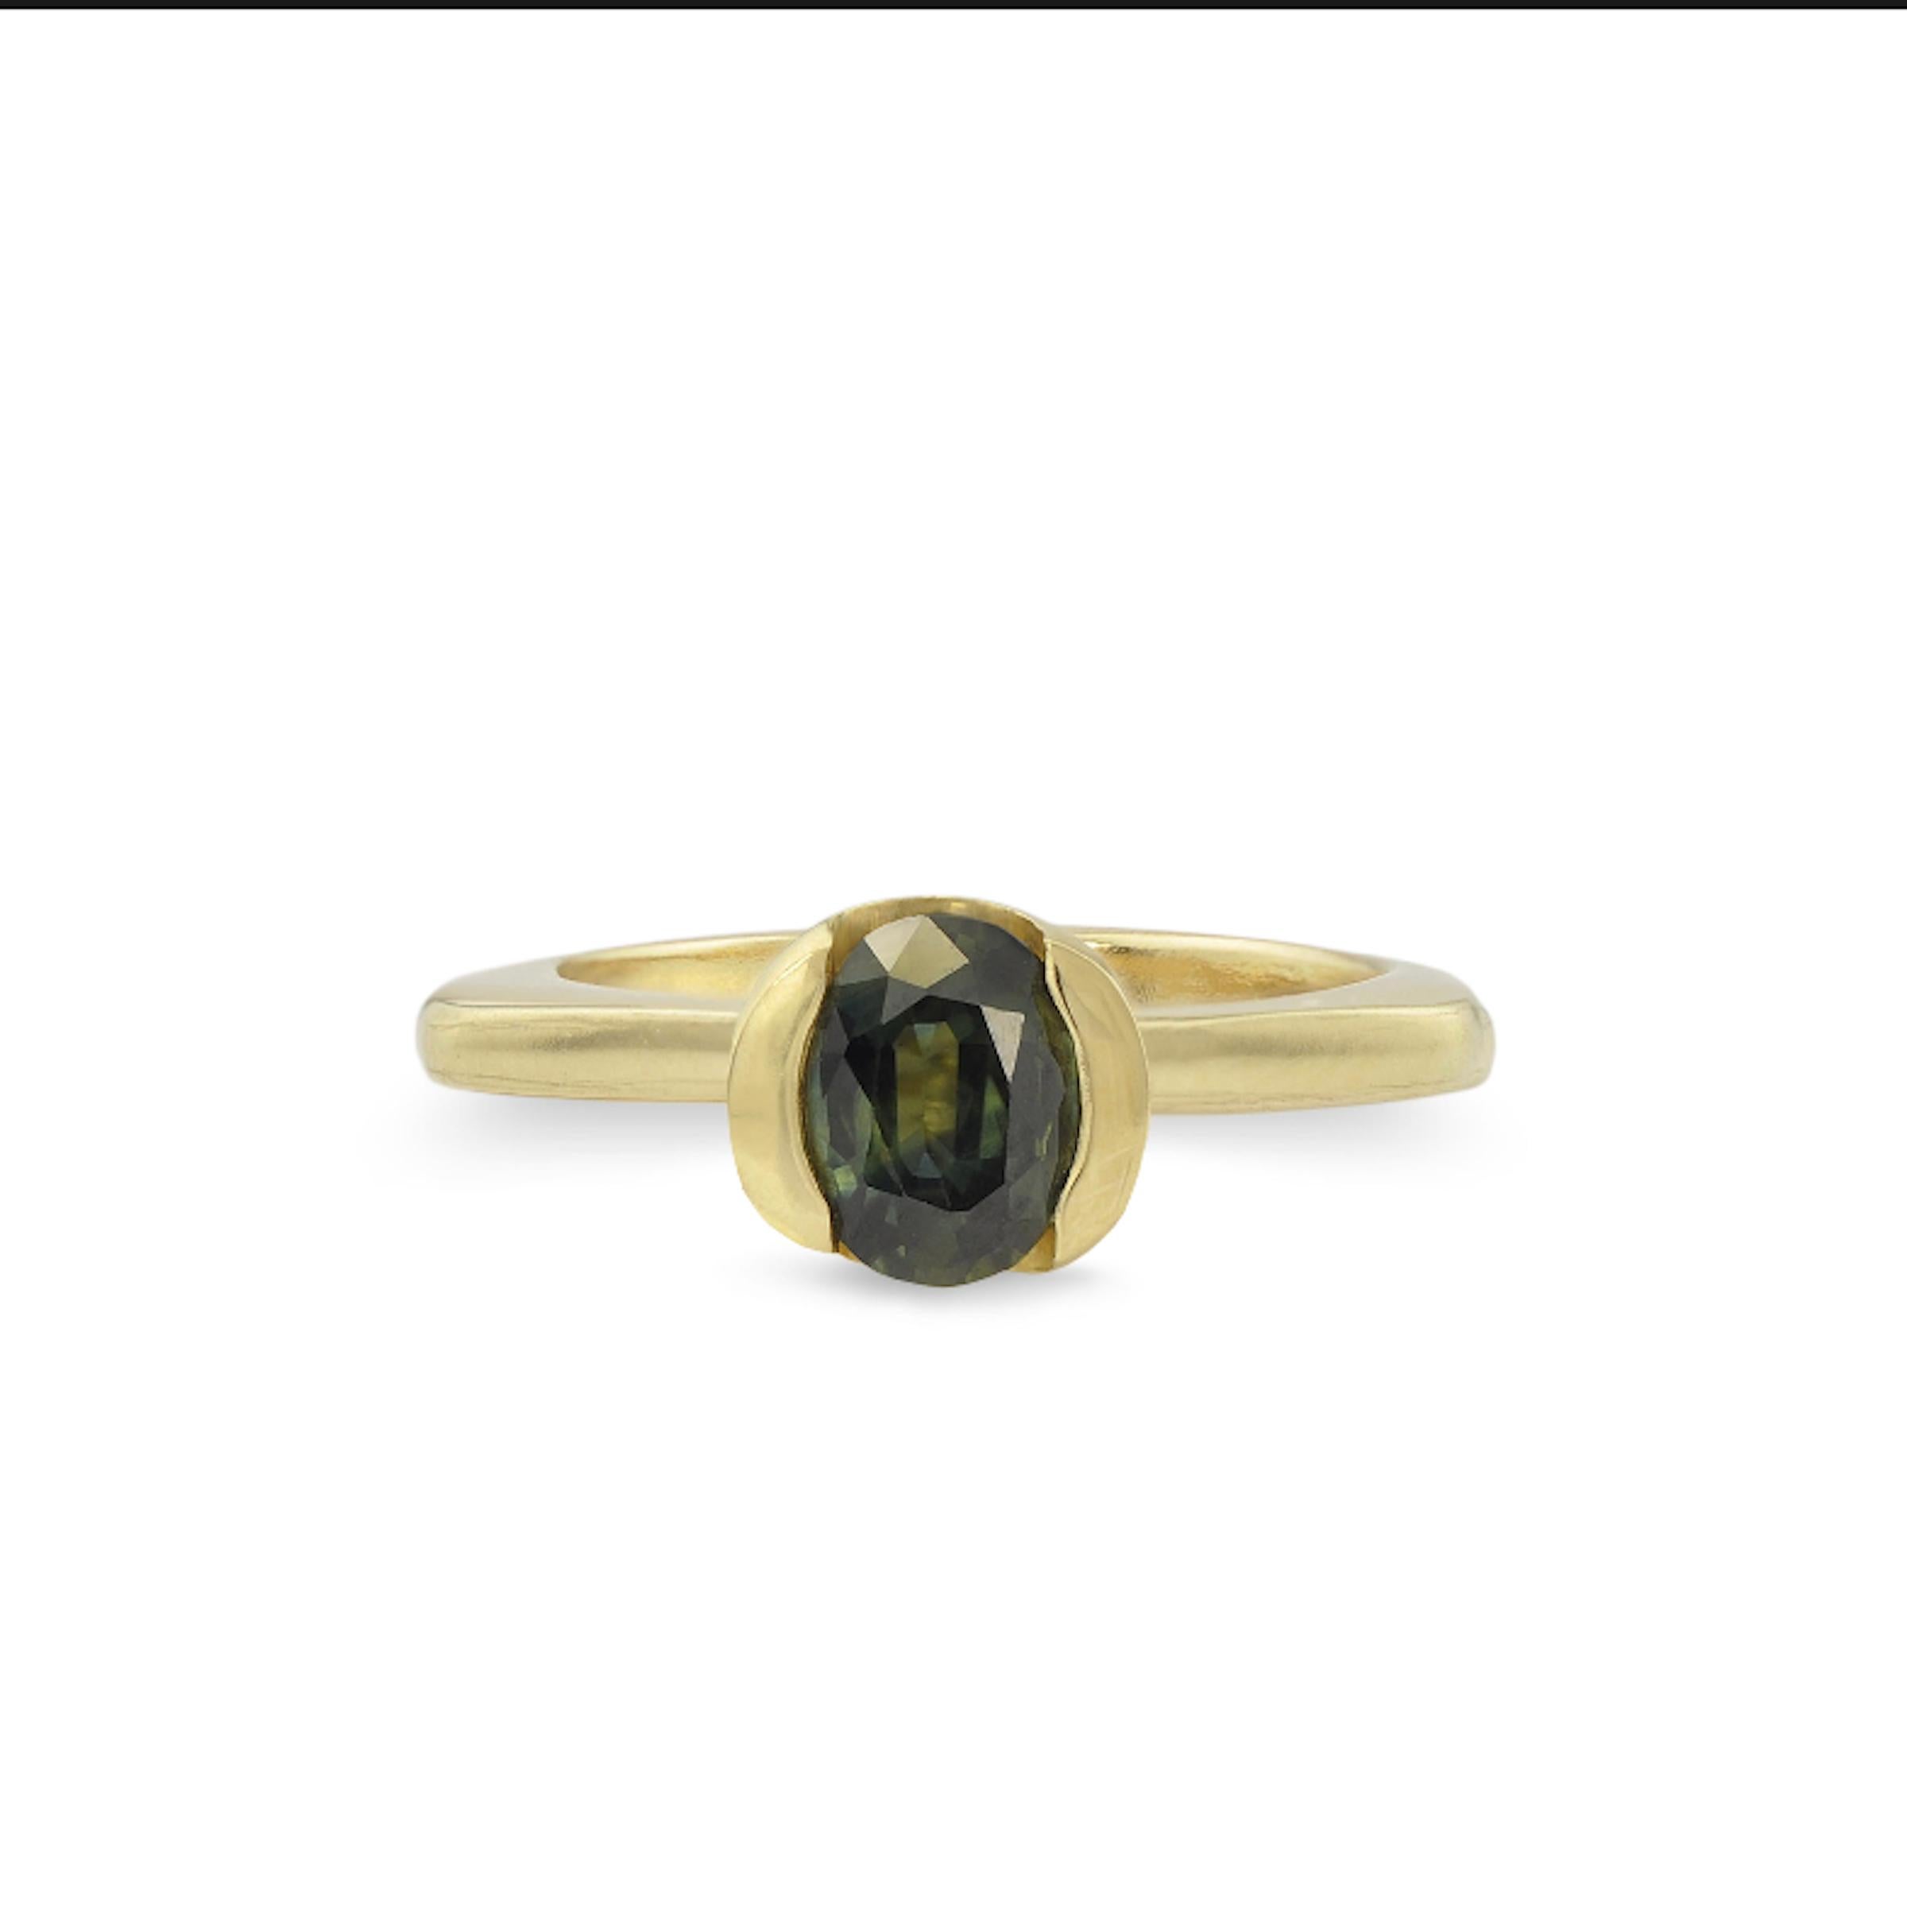 This FAIRMINED Gold and Green Sapphire Ring Set holds a luscious oval green sapphire that is set into a 14kt FAIRMINED yellow gold ring. The second ring is fits perfectly next to the sapphire ring complementing the soft lines and heart shaped shank.